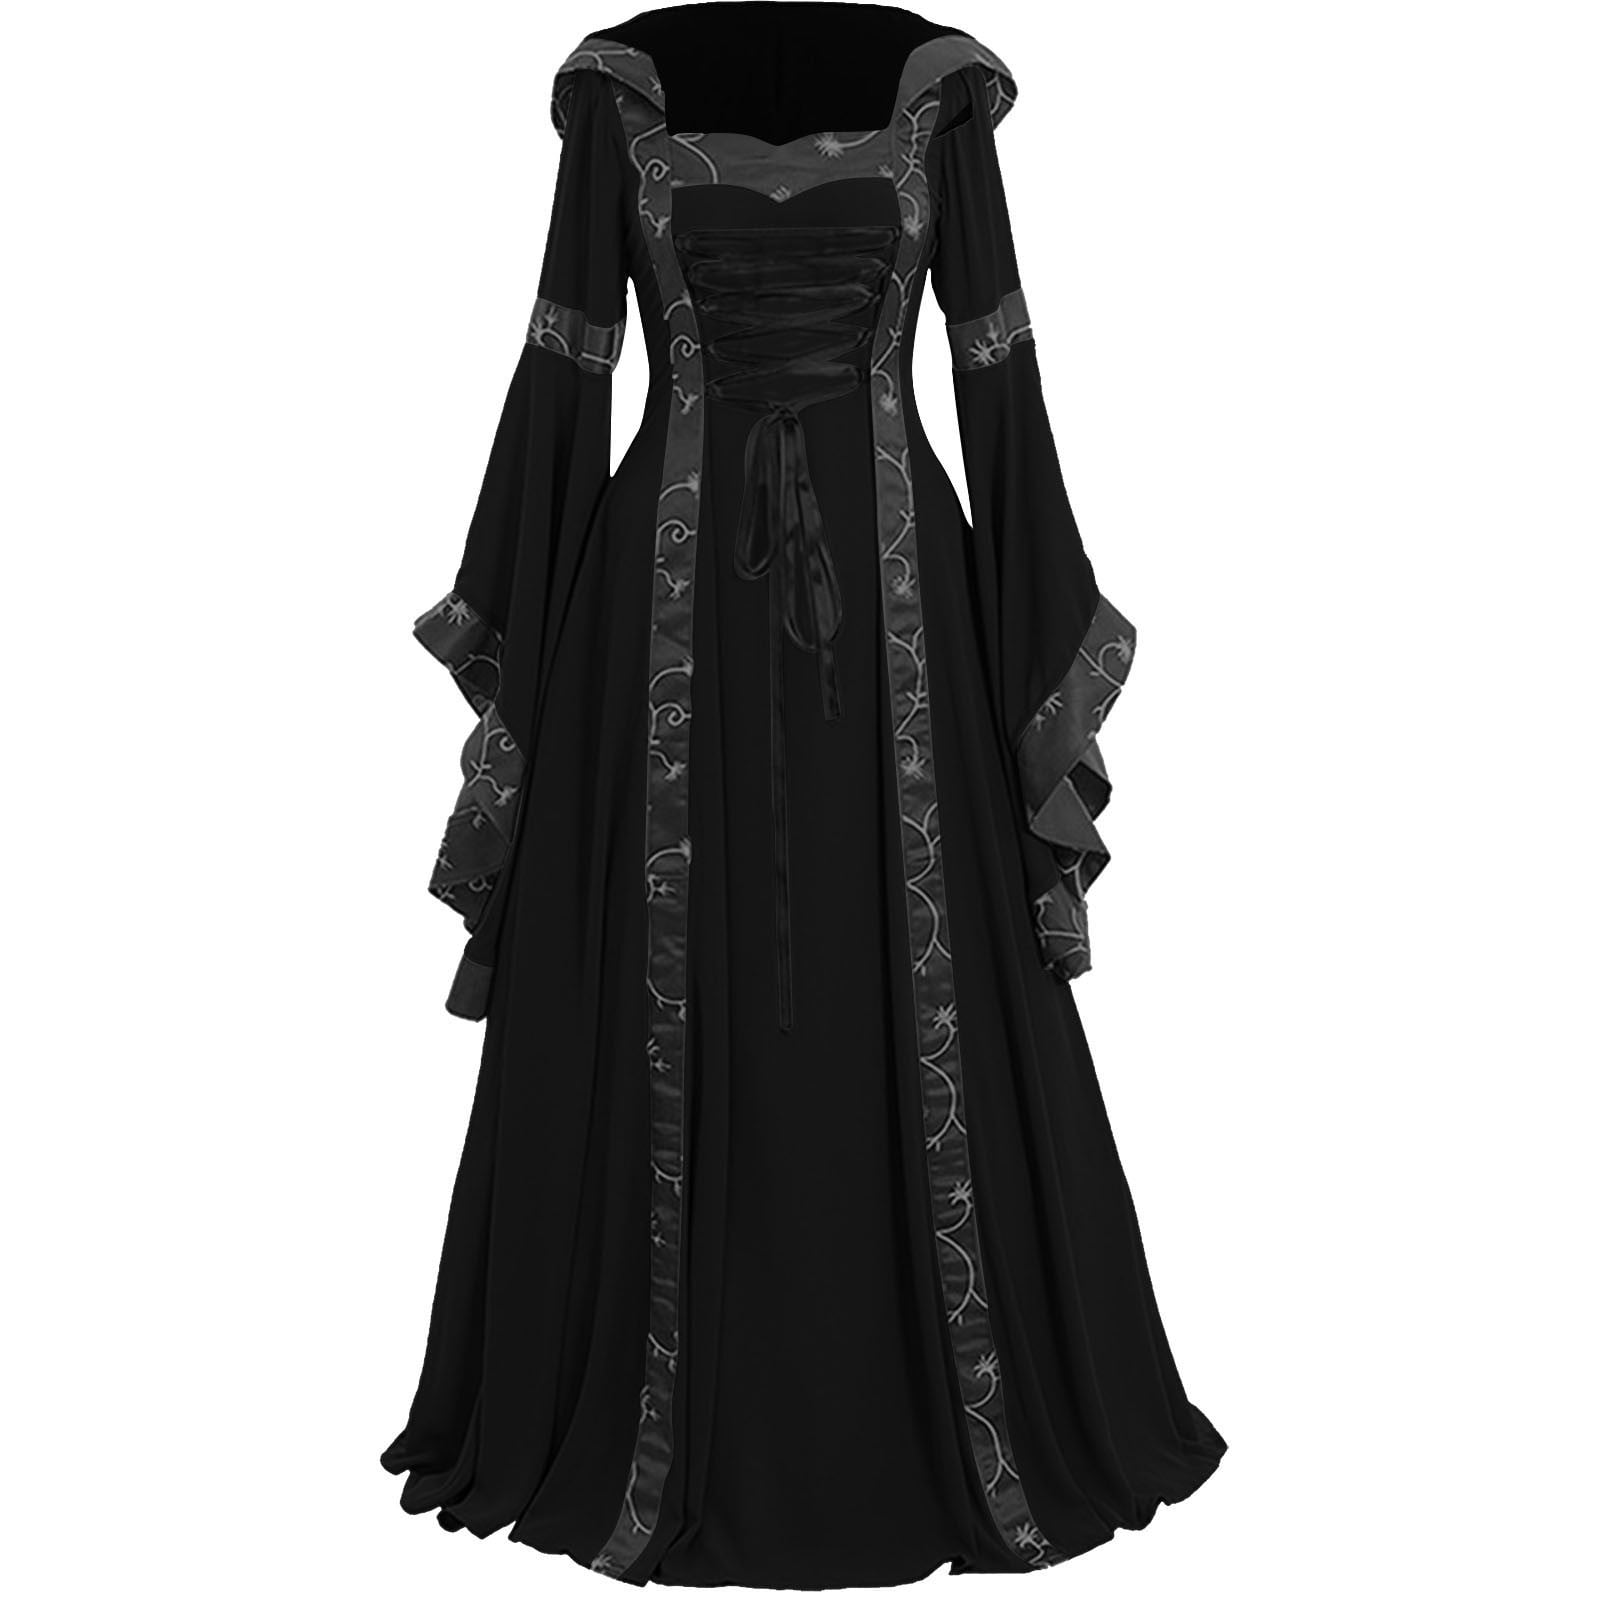 (SALE) Black Evening Dresses Long Luxury Gowns Fashion Ladies Partydress  With Diamond Formal Dress